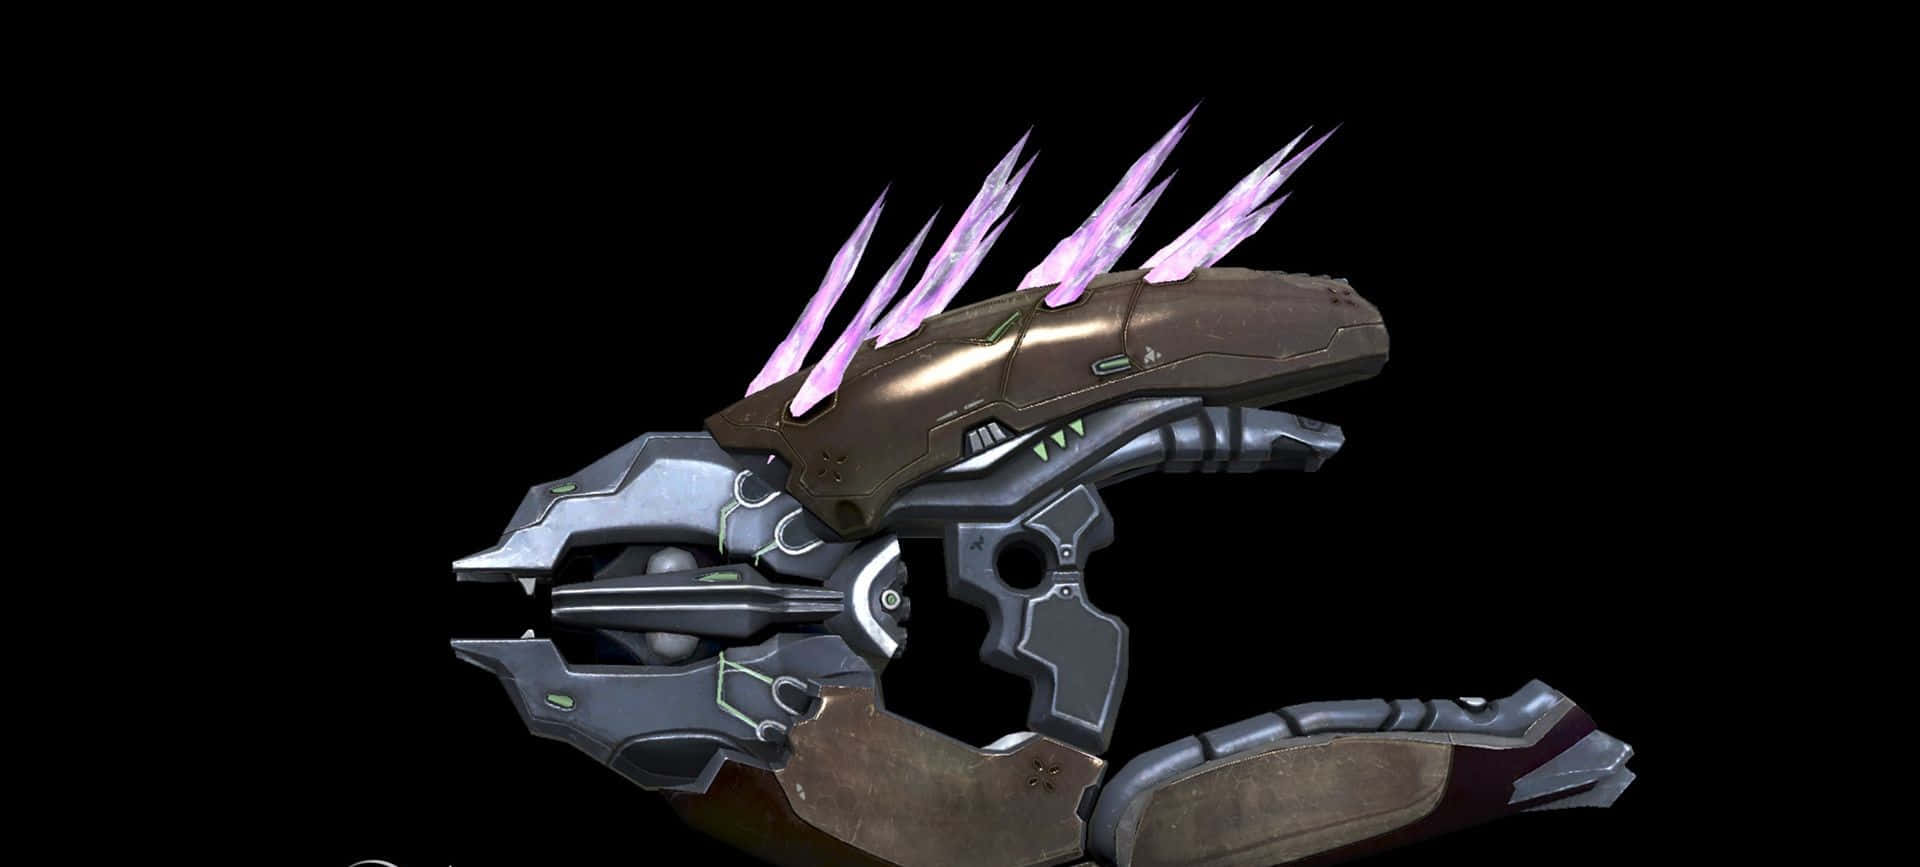 Intimidating Needler from the Halo series ready for action Wallpaper